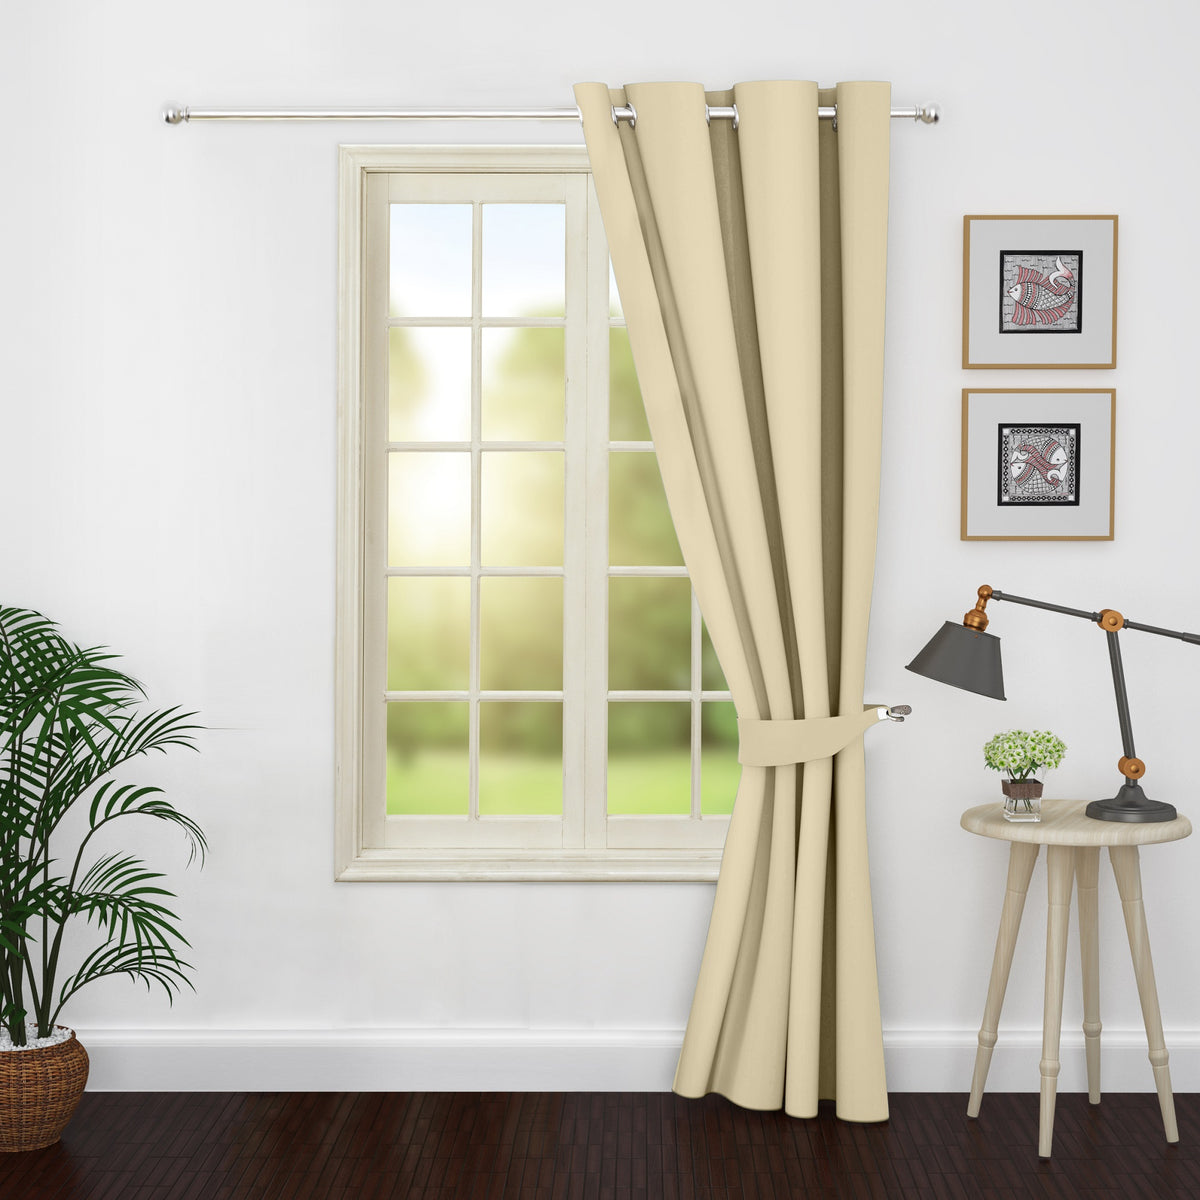 Blackout Curtains - Pack of 1